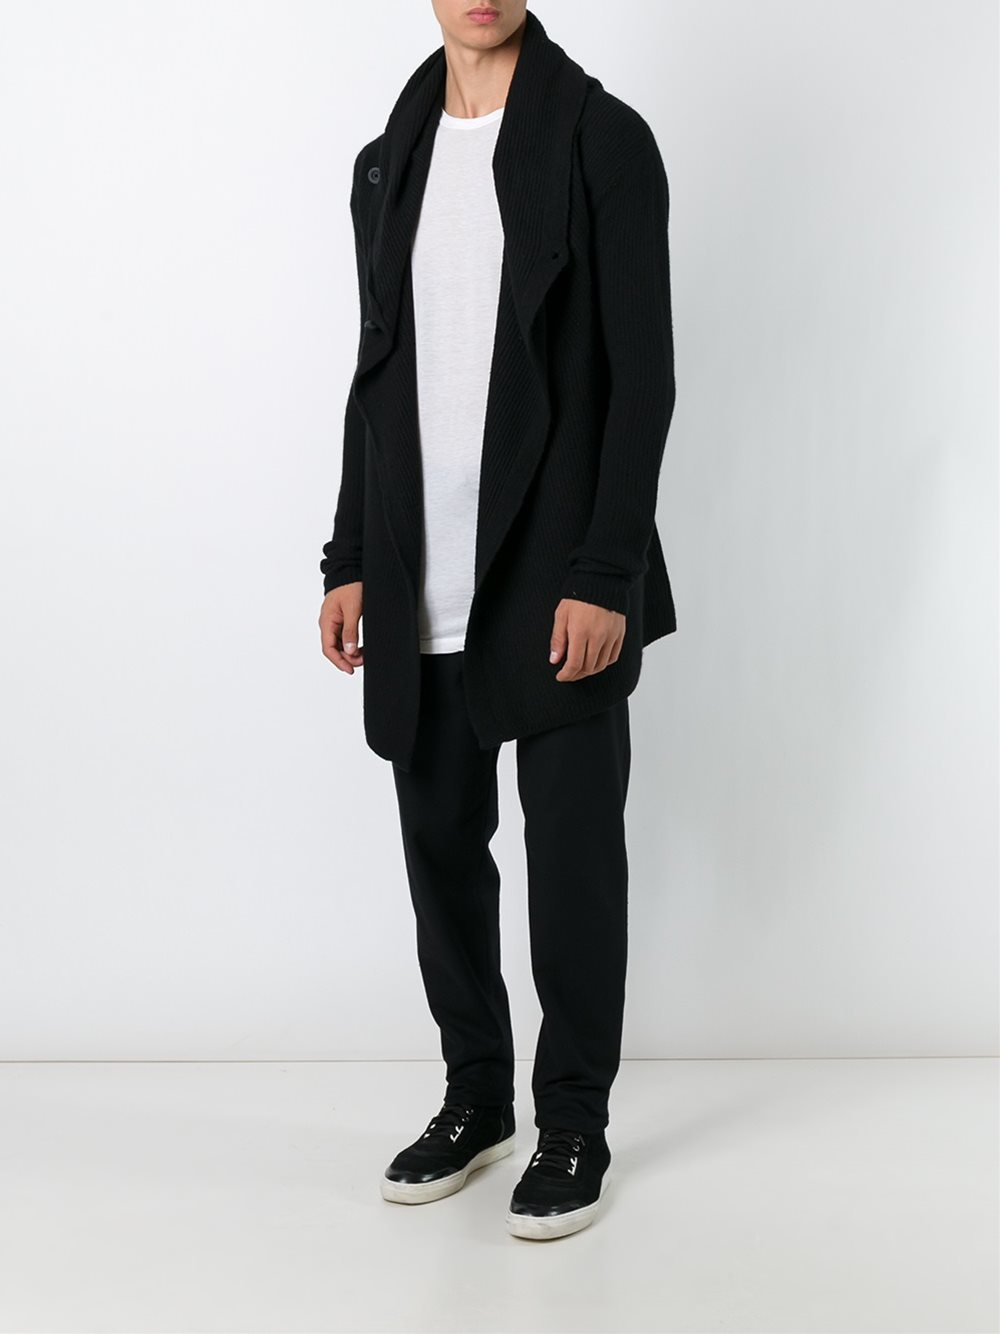 Rick Owens Cashmere Hooded Cardigan in Black for Men - Lyst